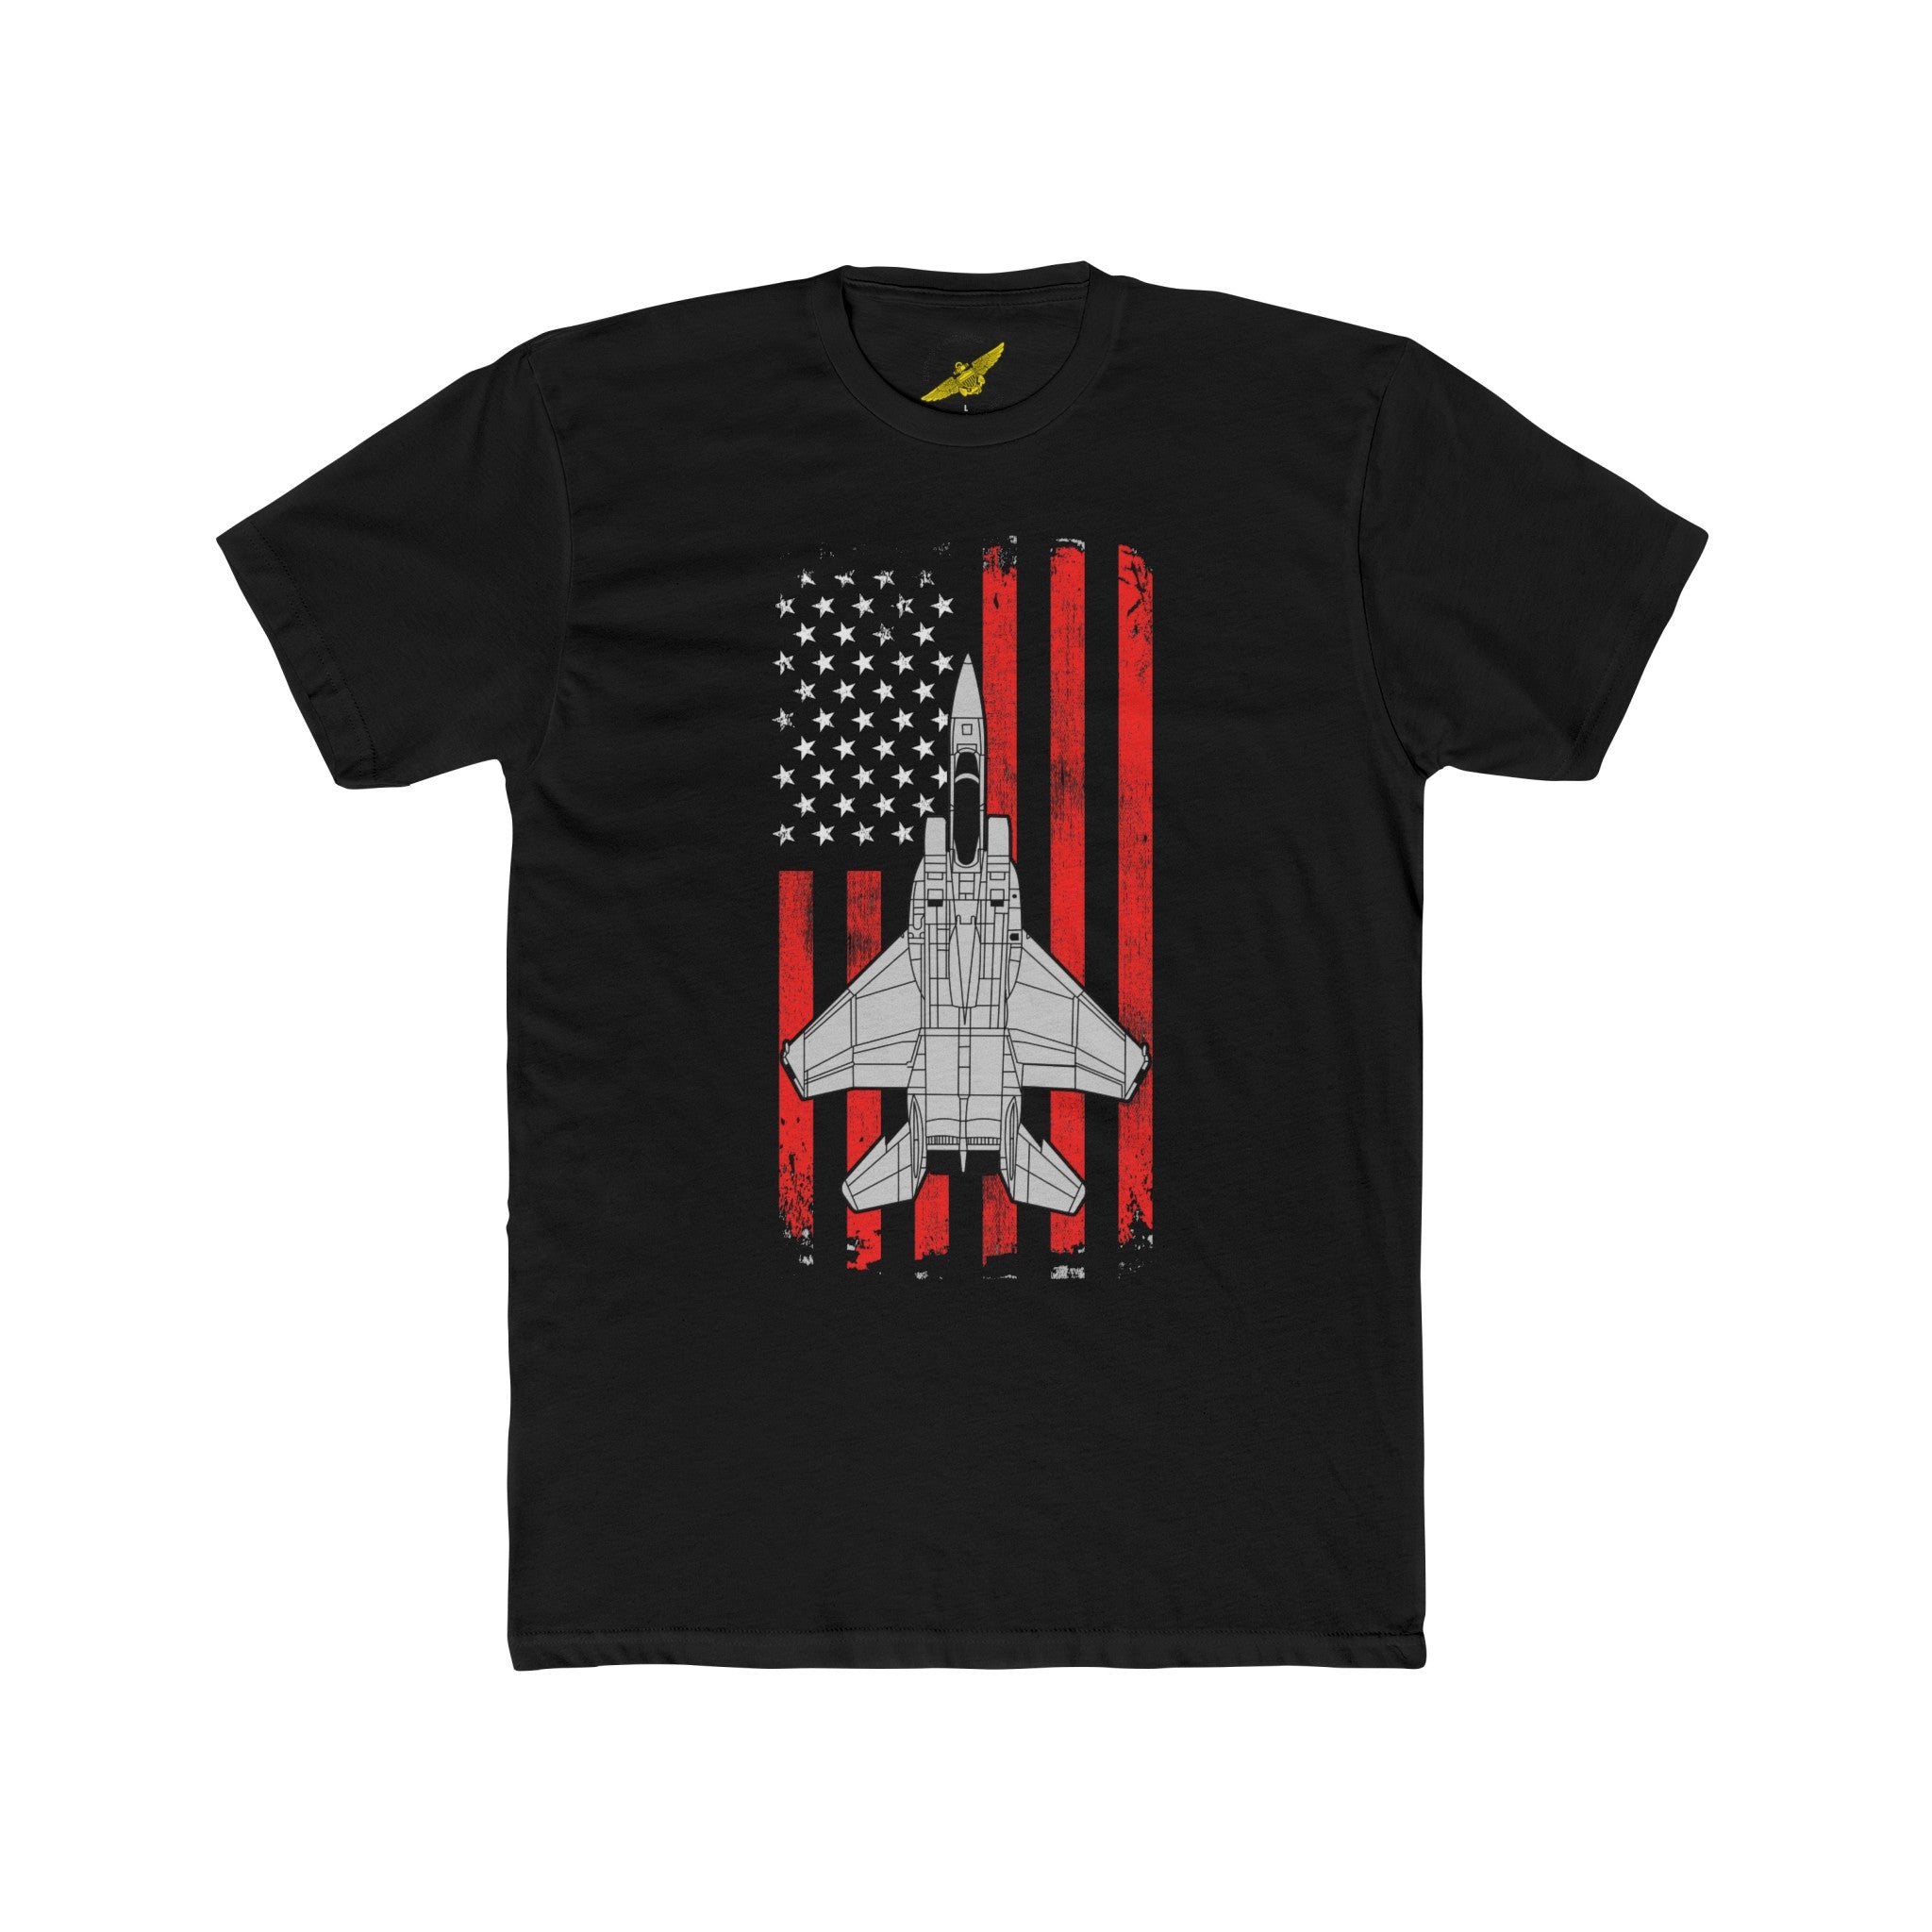 F-15 Eagle Patriotic Flag Tee, US Air Force Fighter Aircraft